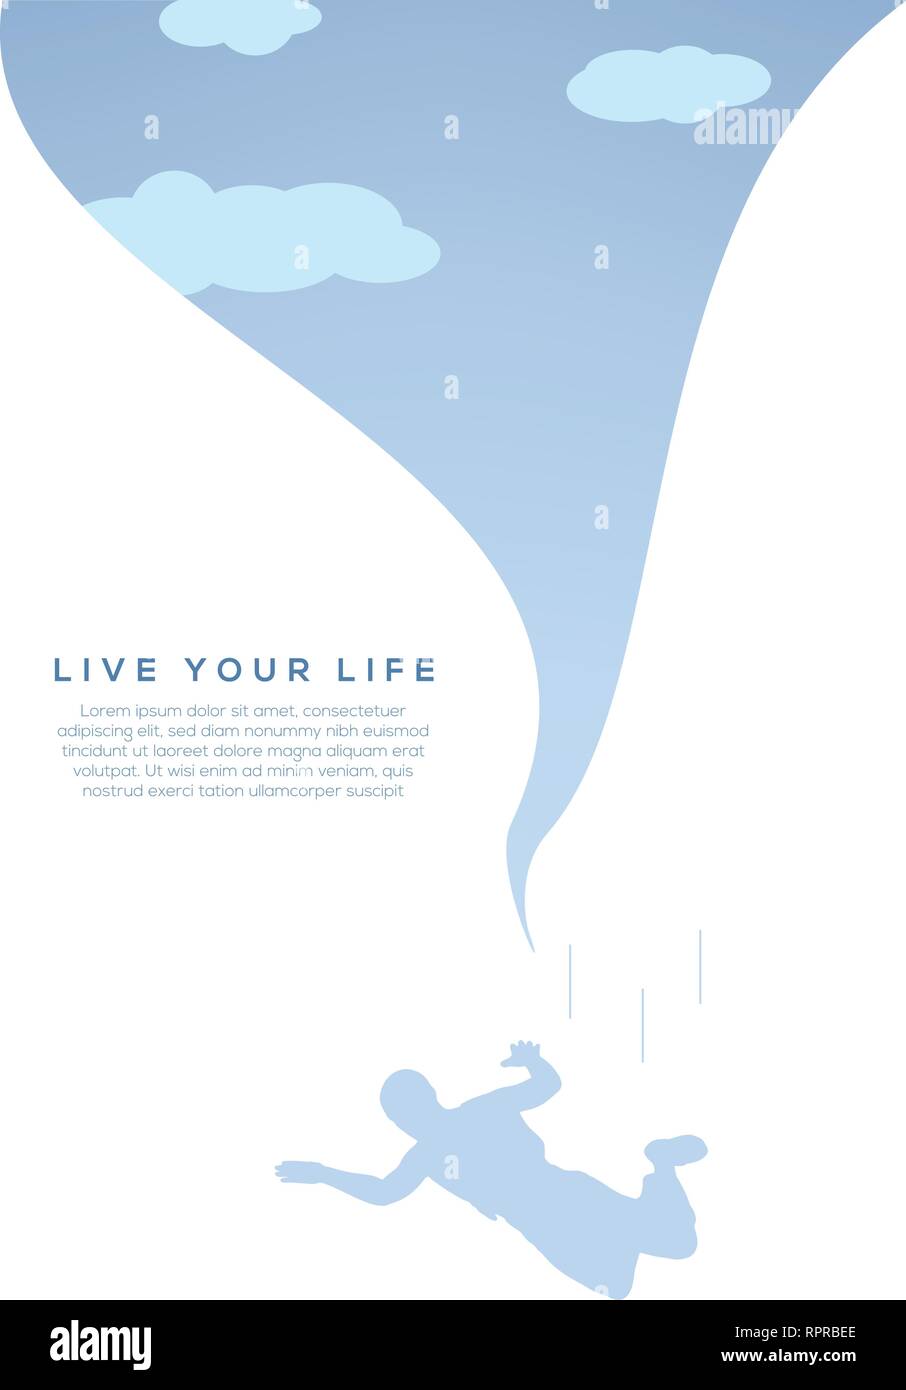 Live your Life Motivation Concept with Parachuting Silhouette Character Vector Template Stock Vector